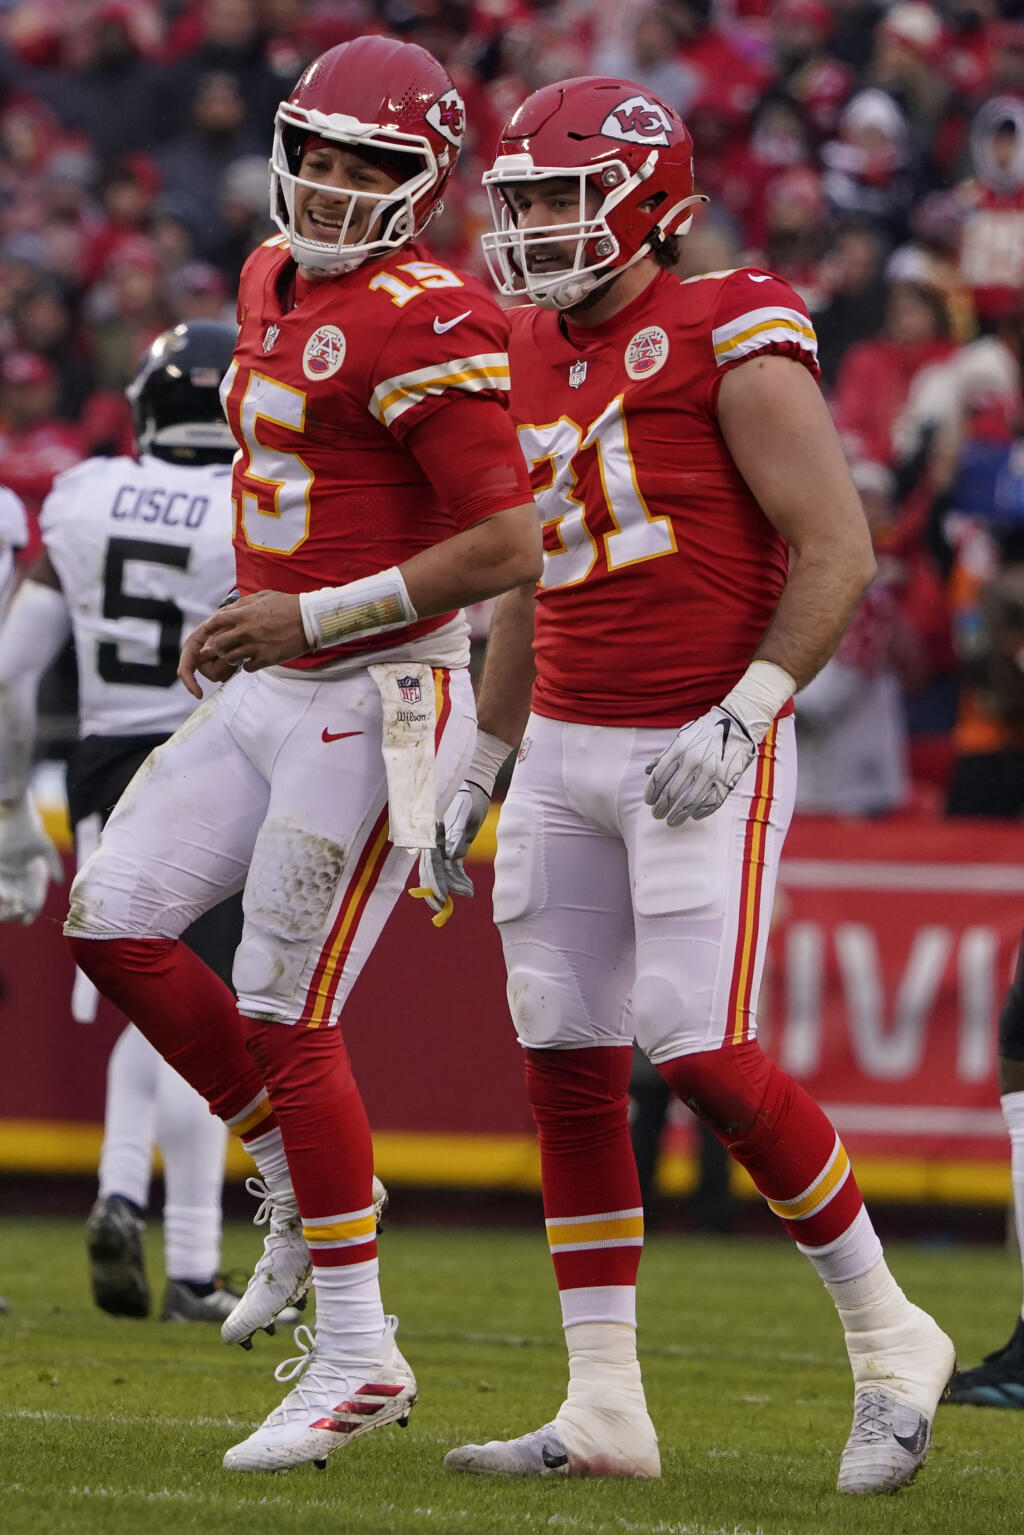 Kansas City Chiefs quarterback Patrick Mahomes (15) limps after an injury during the first half of an NFL divisional round playoff football game against the Jacksonville Jaguars, Saturday, Jan. 21, 2023, in Kansas City, Mo. (AP Photo/Ed Zurga)